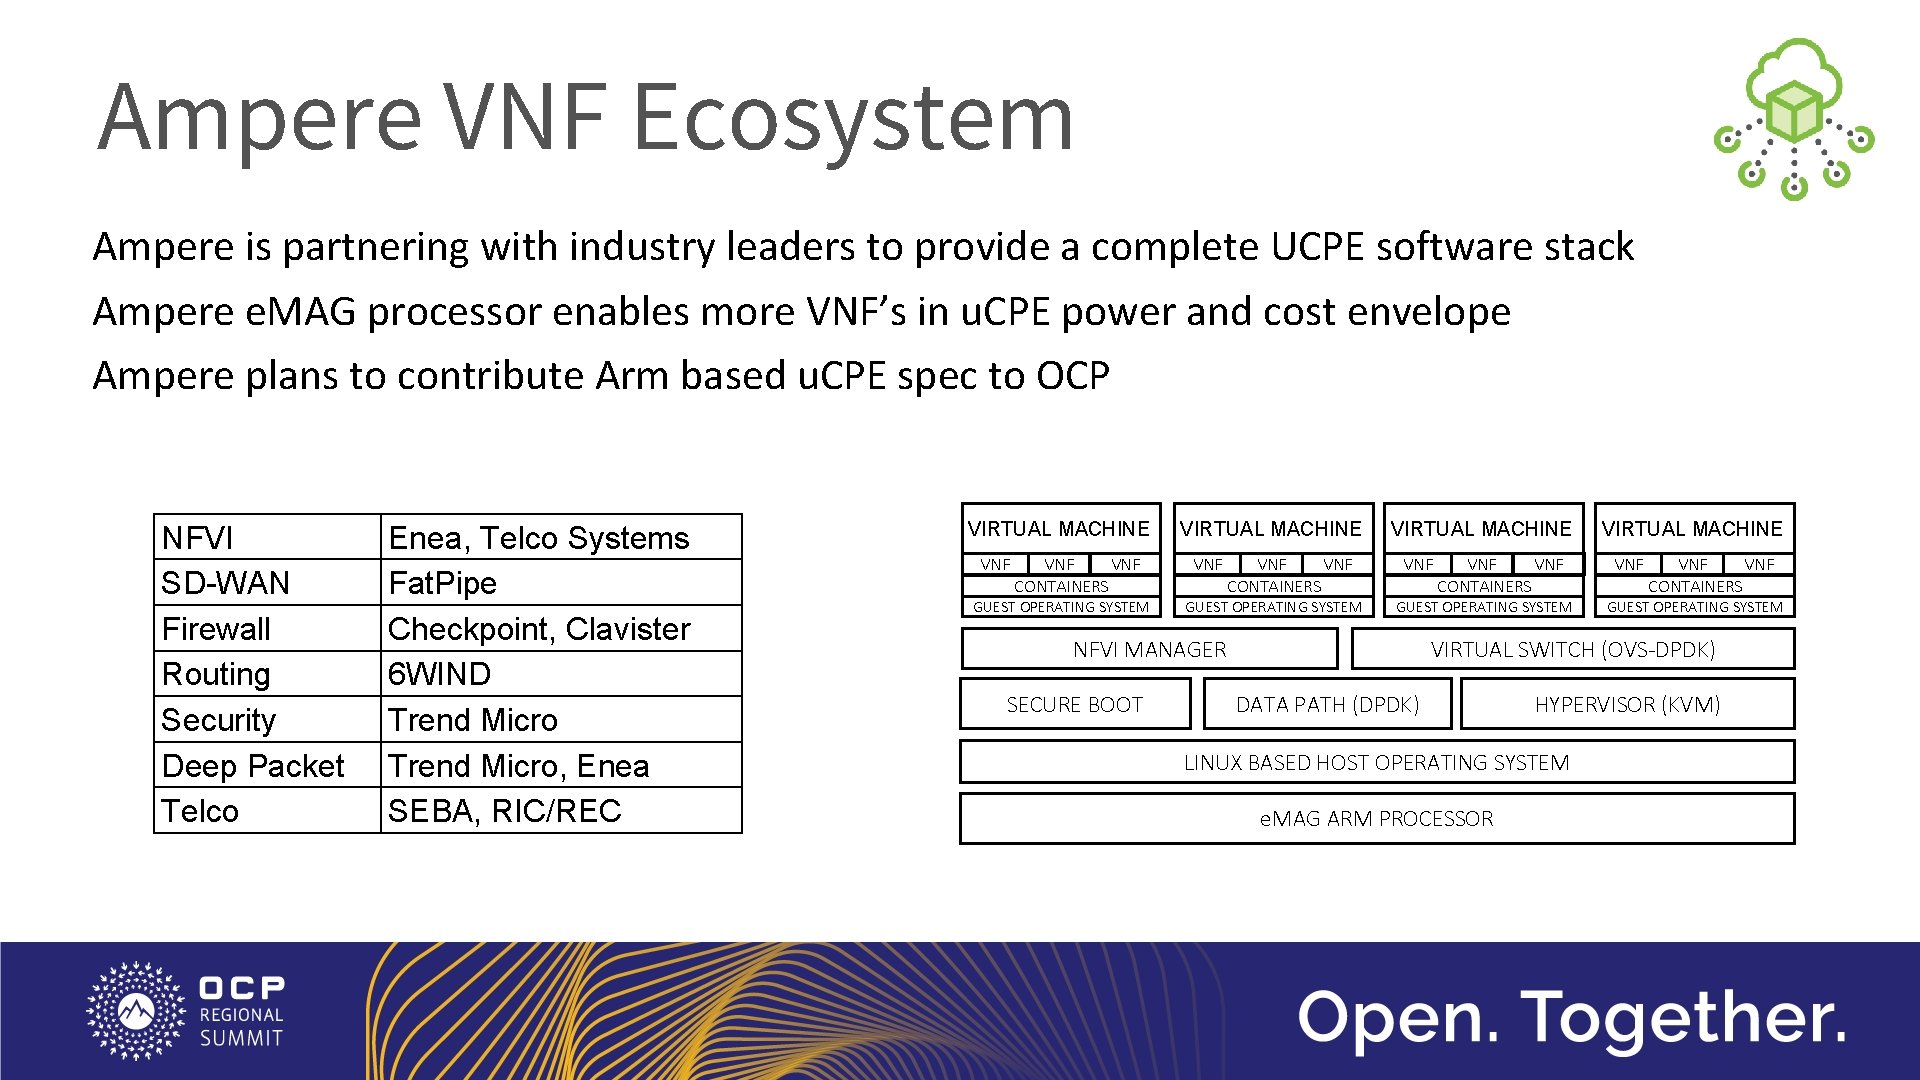 Ampere VNF Ecosystem Ampere is partnering with industry leaders to provide a complete UCPE